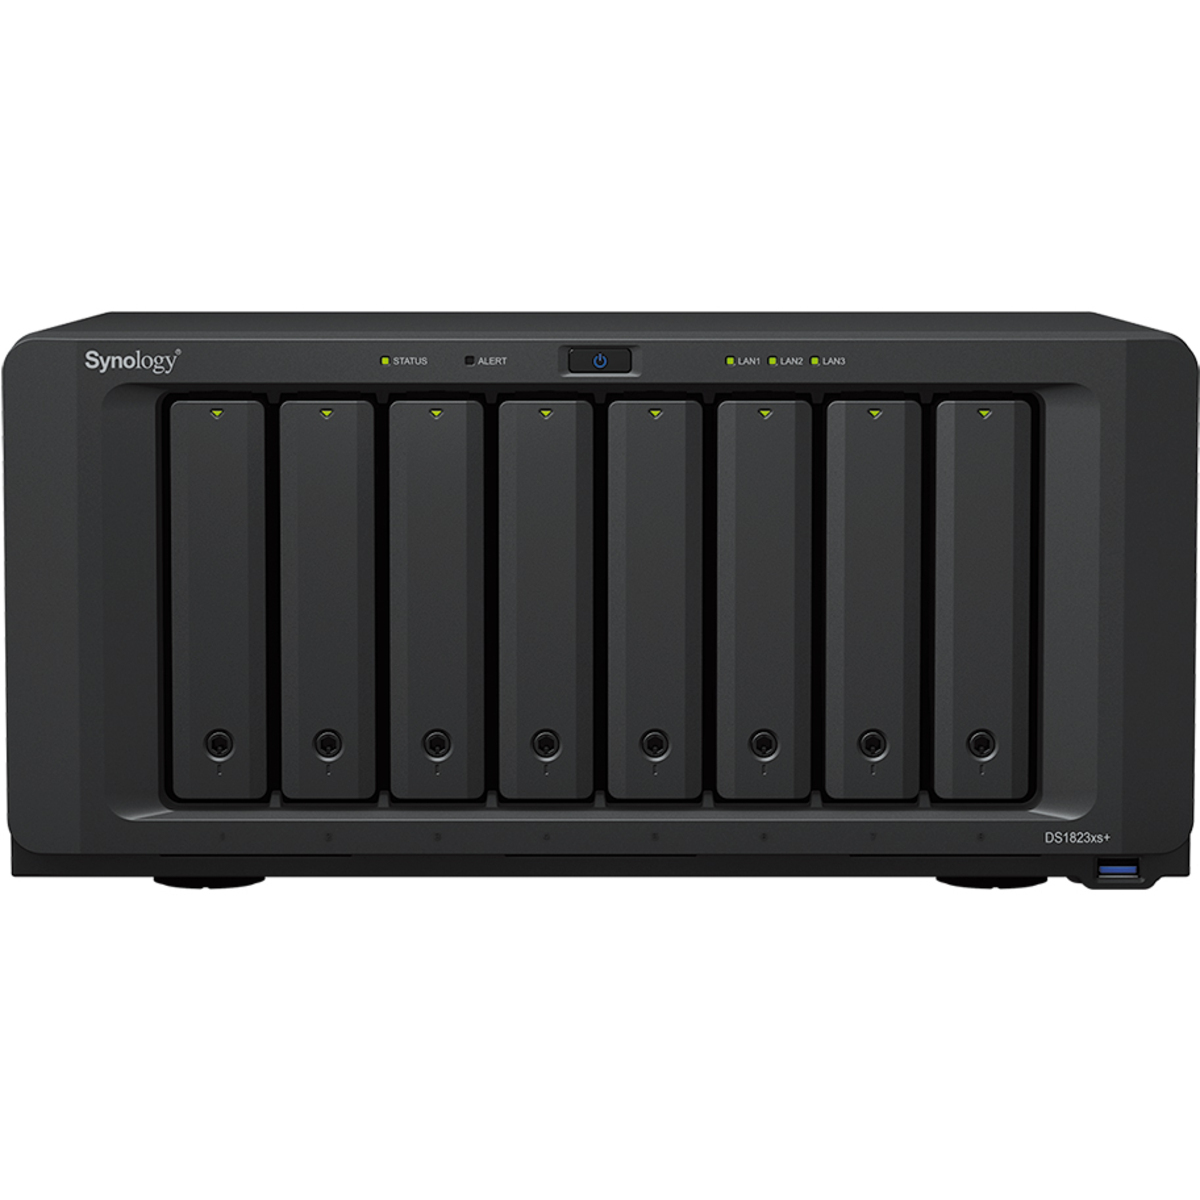 Synology DiskStation DS1823xs+ 20tb 8-Bay Desktop Multimedia / Power User / Business NAS - Network Attached Storage Device 5x4tb Western Digital Red Pro WD4005FFBX 3.5 7200rpm SATA 6Gb/s HDD NAS Class Drives Installed - Burn-In Tested DiskStation DS1823xs+